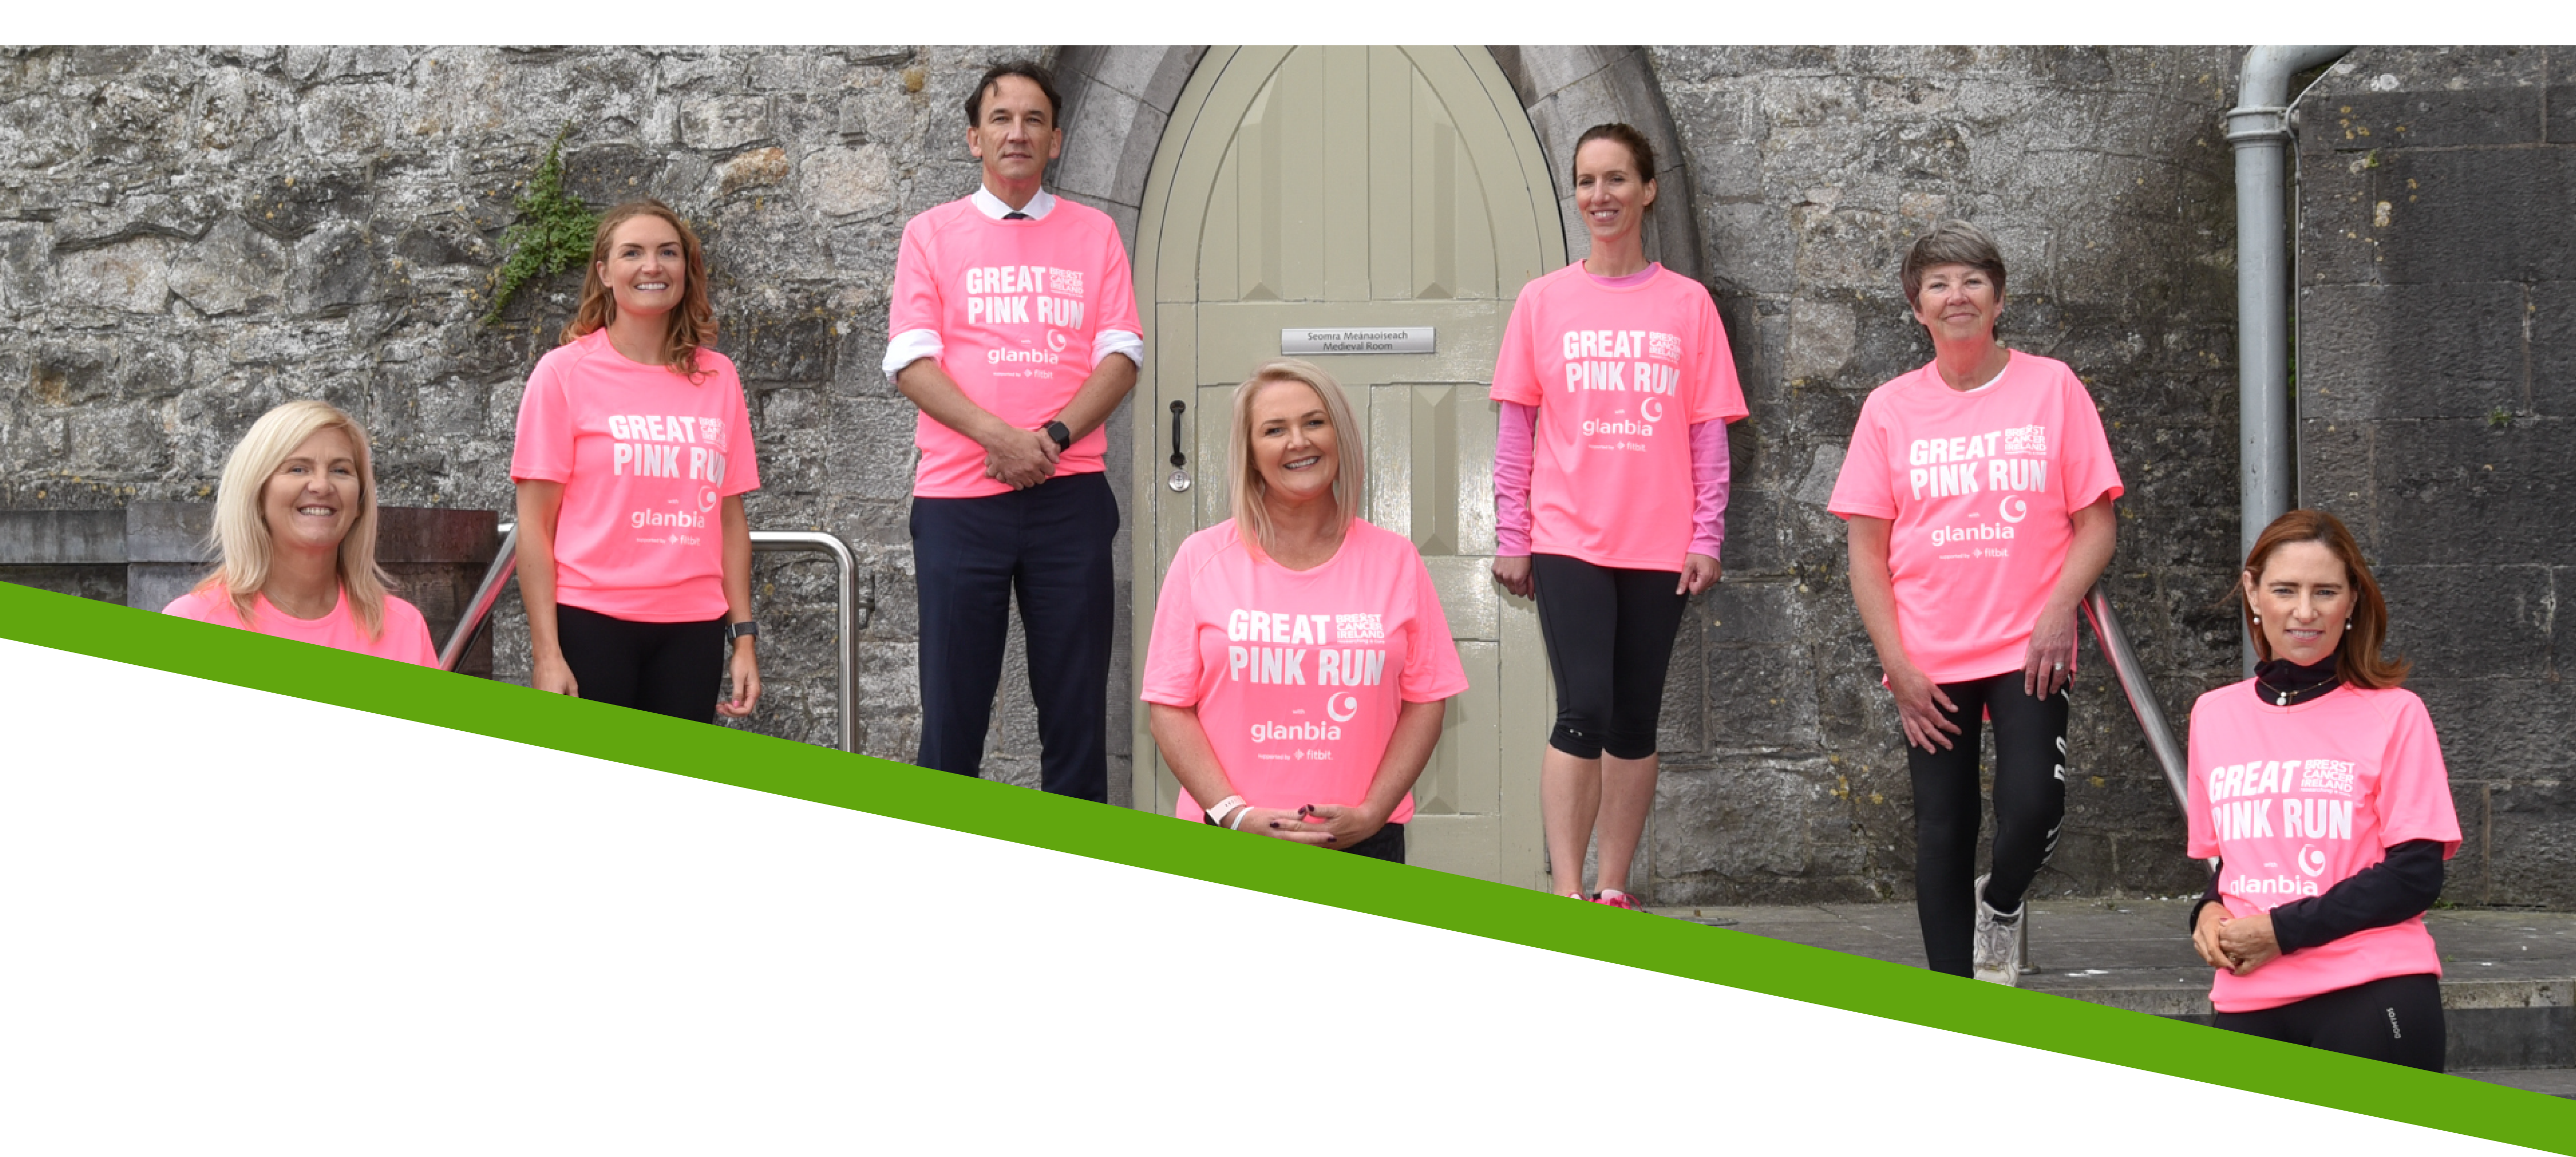 Our Impact - Breast Cancer Ireland